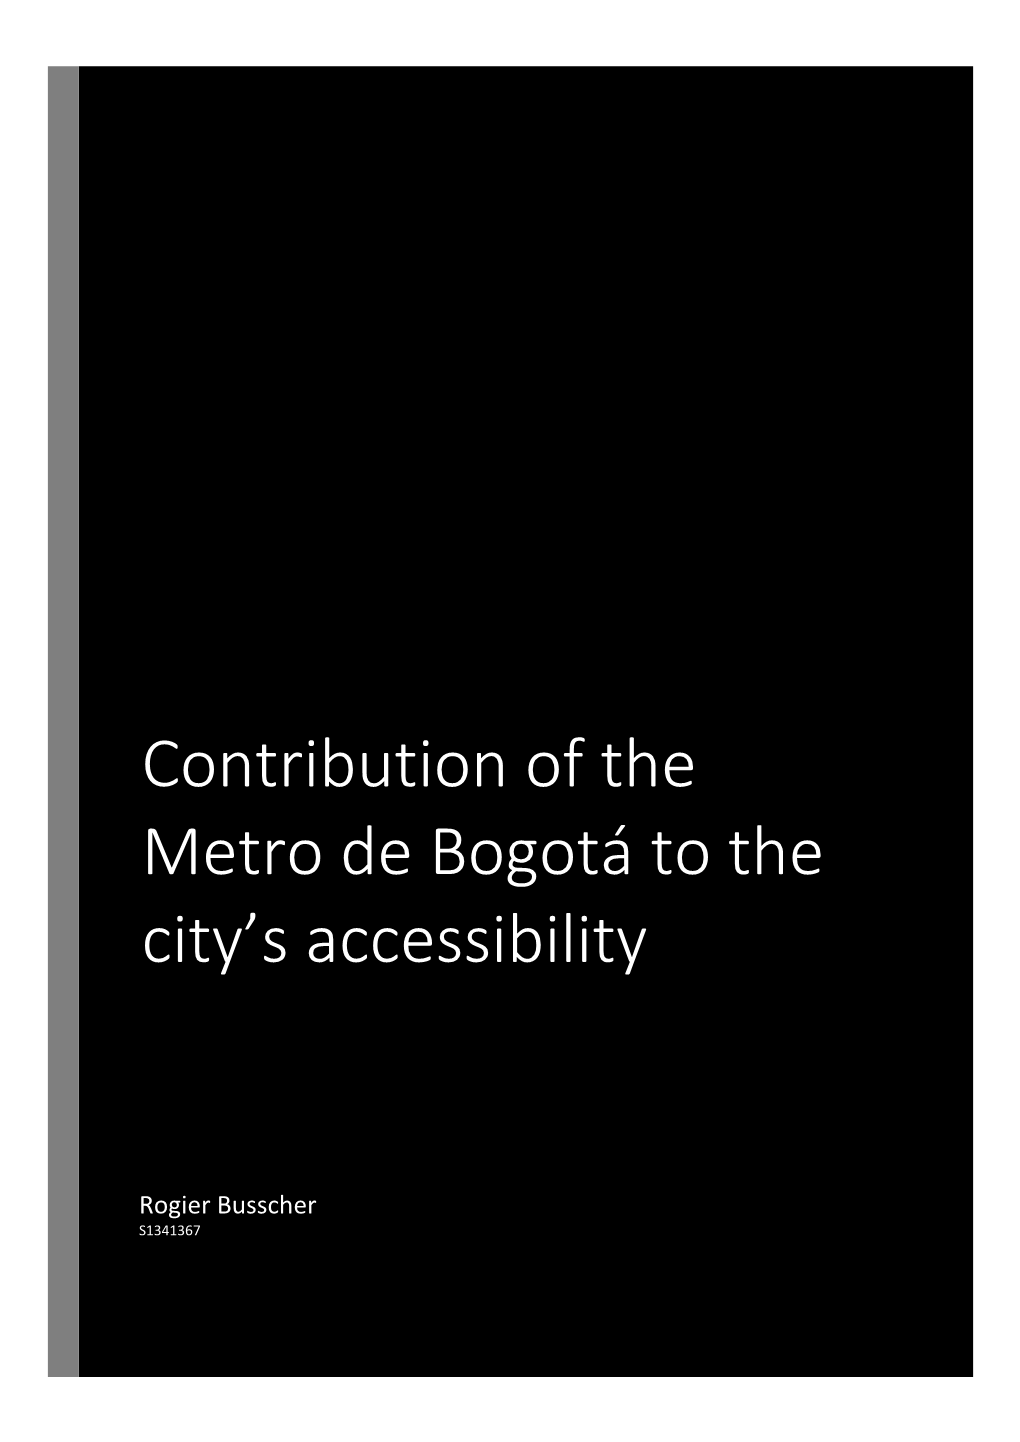 Contribution of the Metro De Bogotá to the City's Accessibility